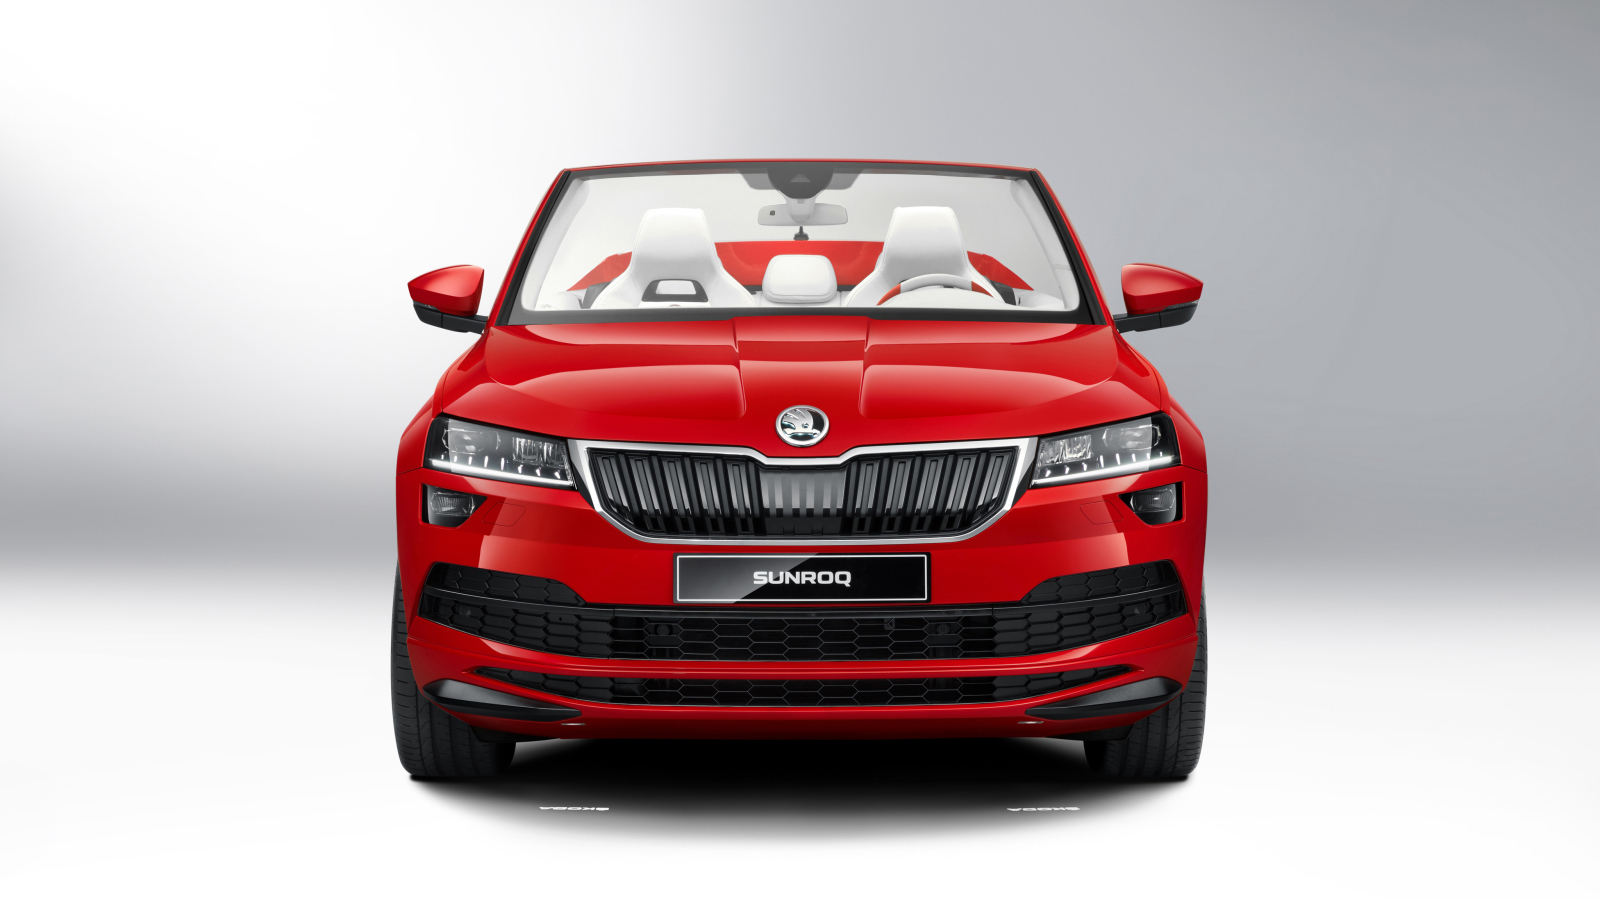 Red car Skoda Sunroq Concept 2018 front view